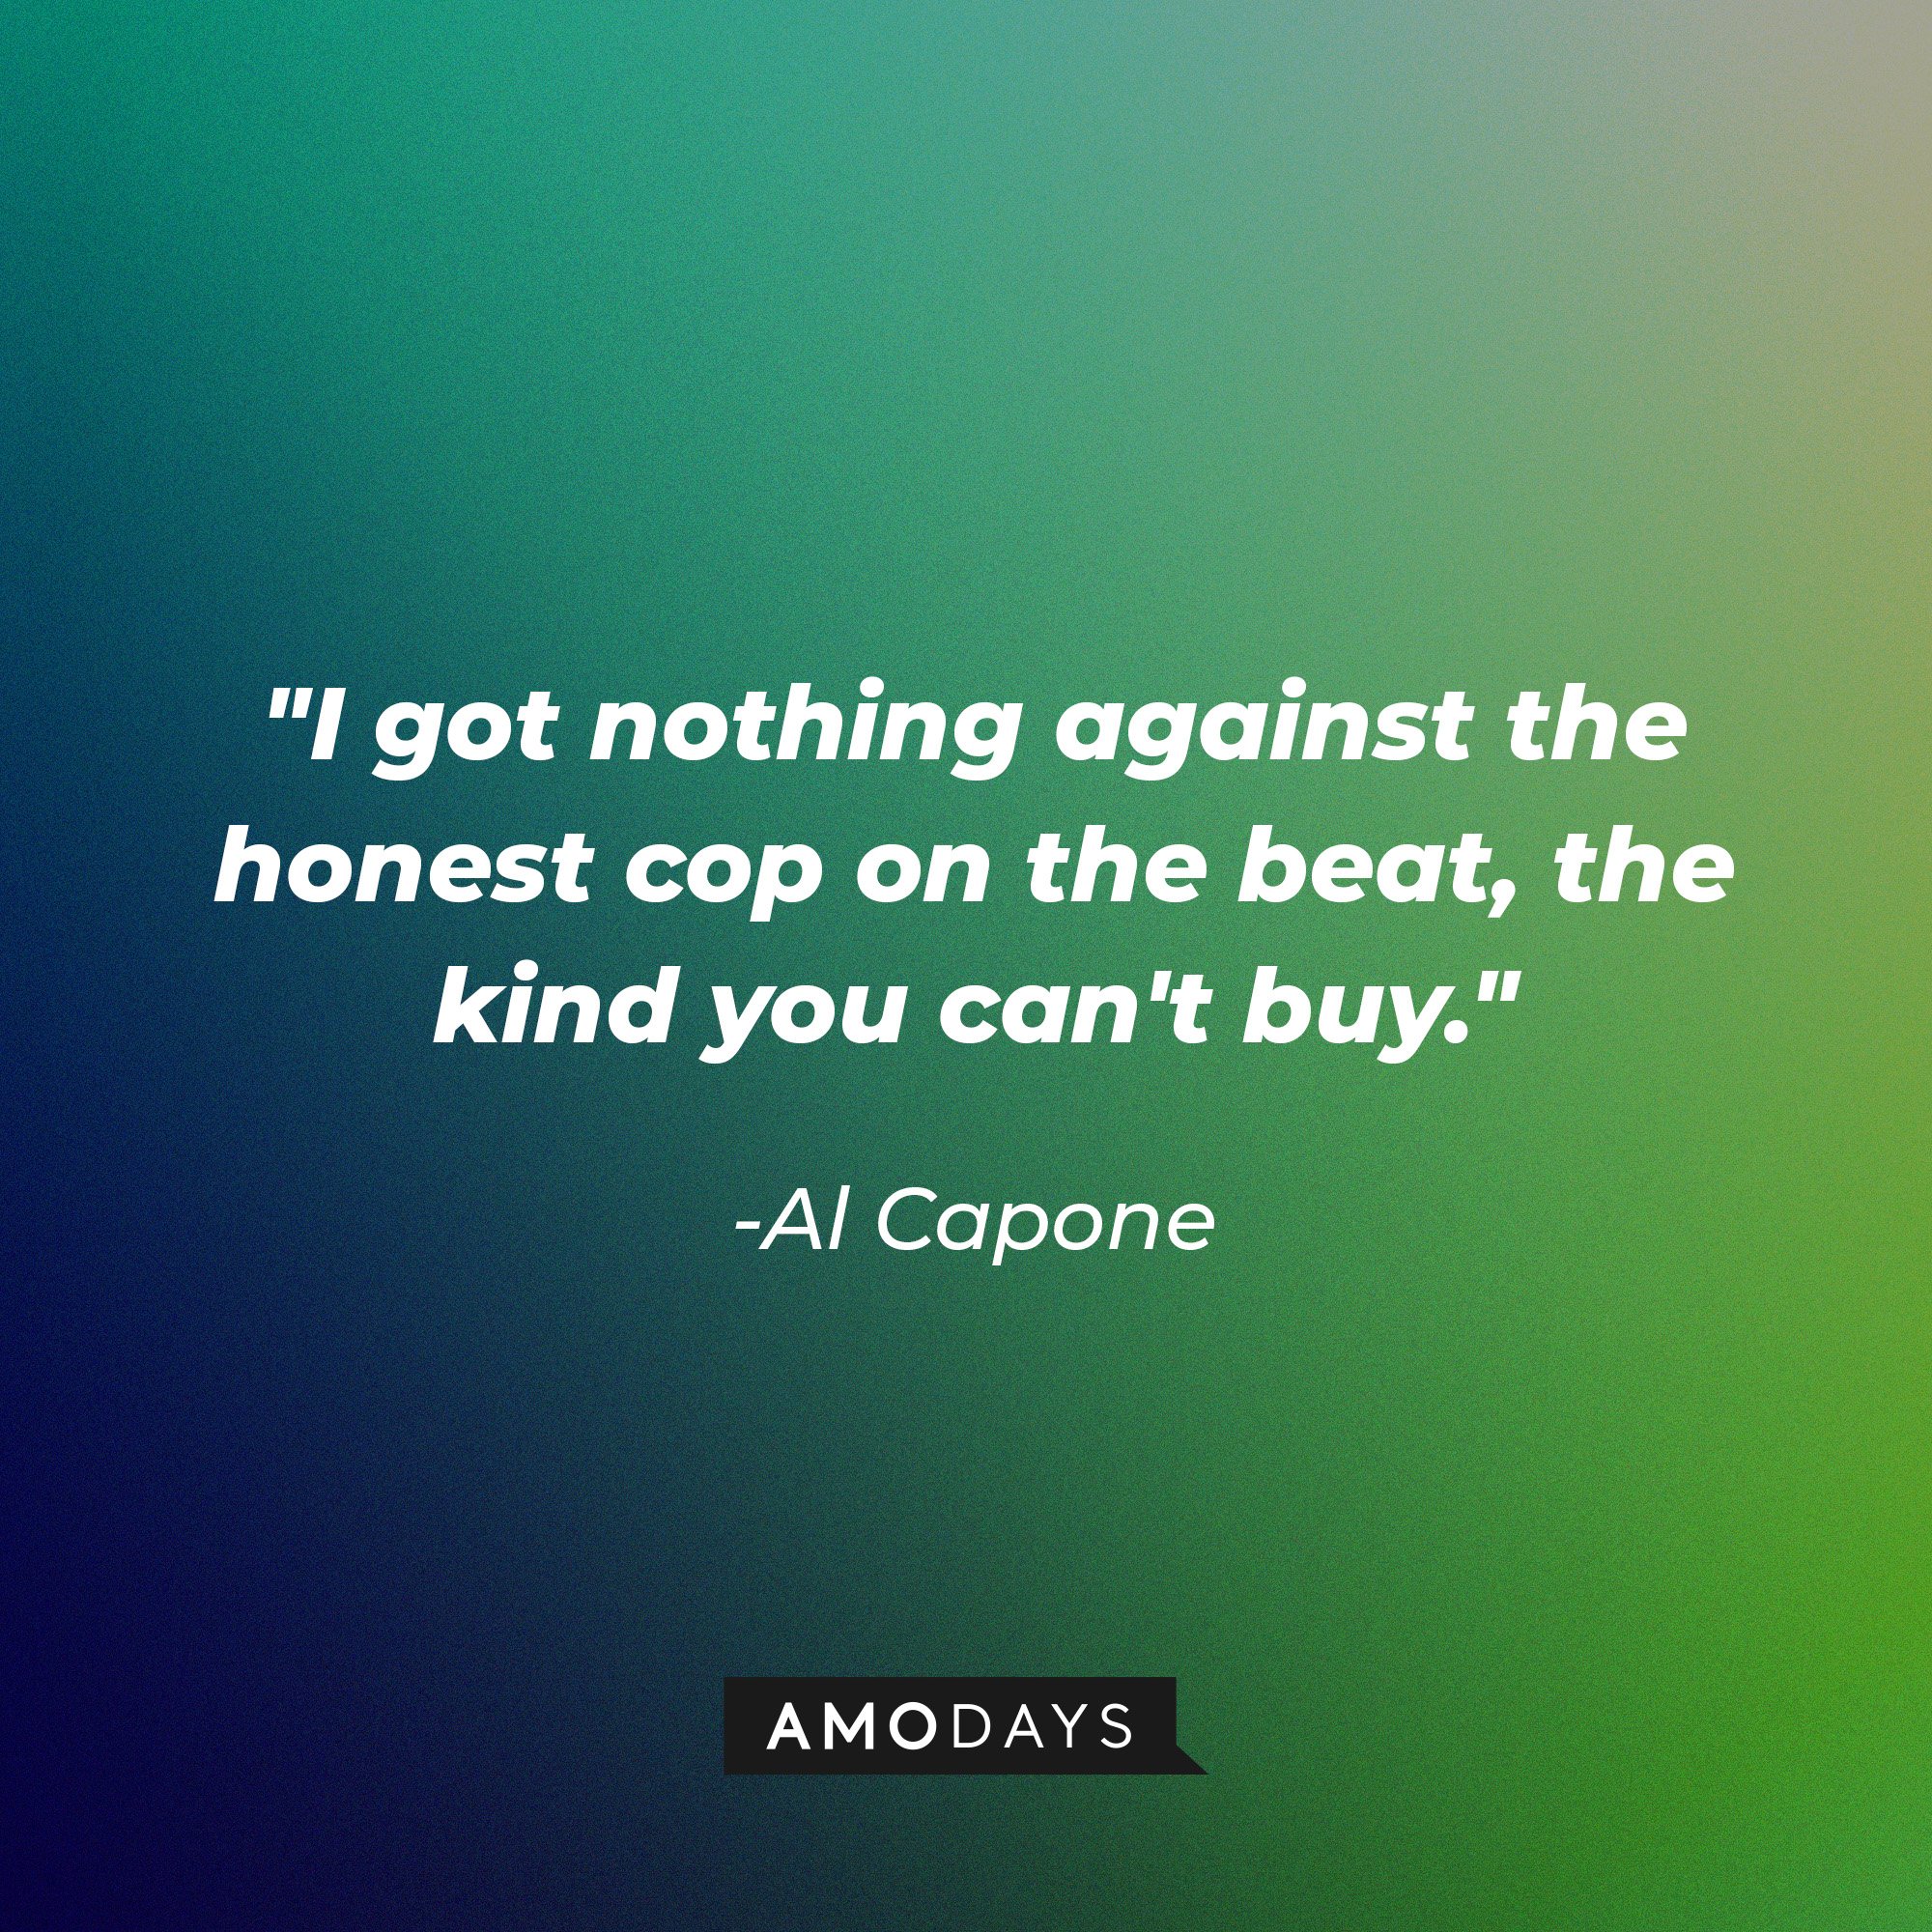 Al Capone’s quote: "I got nothing against the honest cop on the beat, the kind you can't buy." | Image: AmoDays